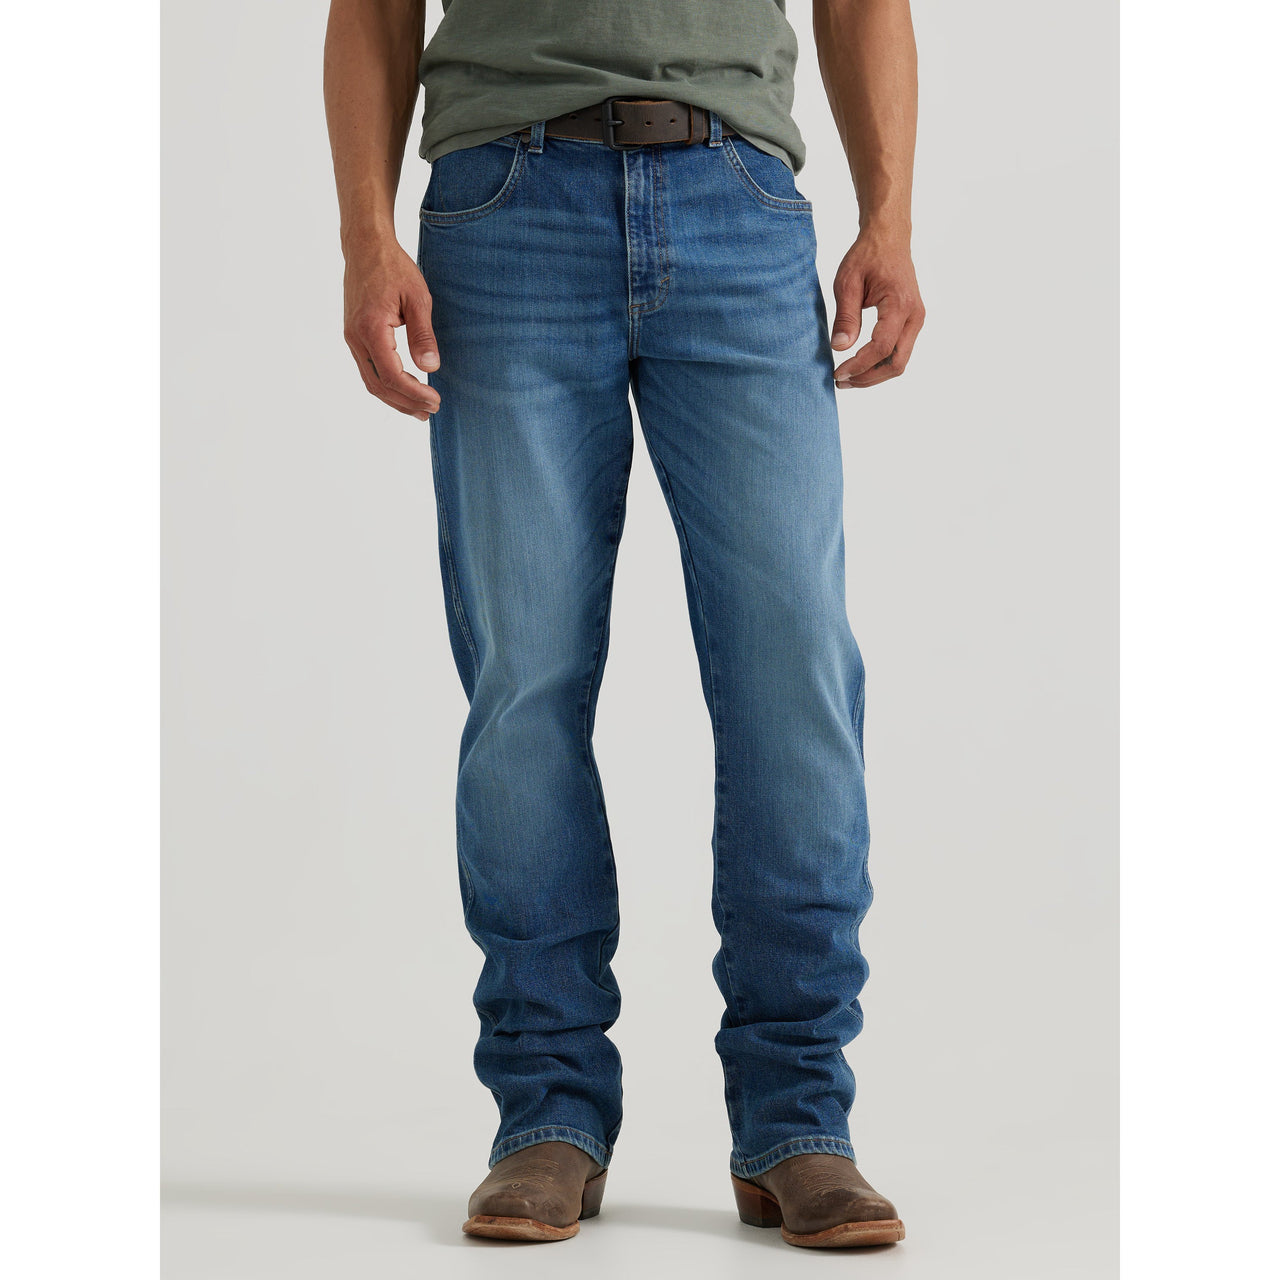 Wrangler Men's Retro Relaxed Bootcut Jeans - Andalusian